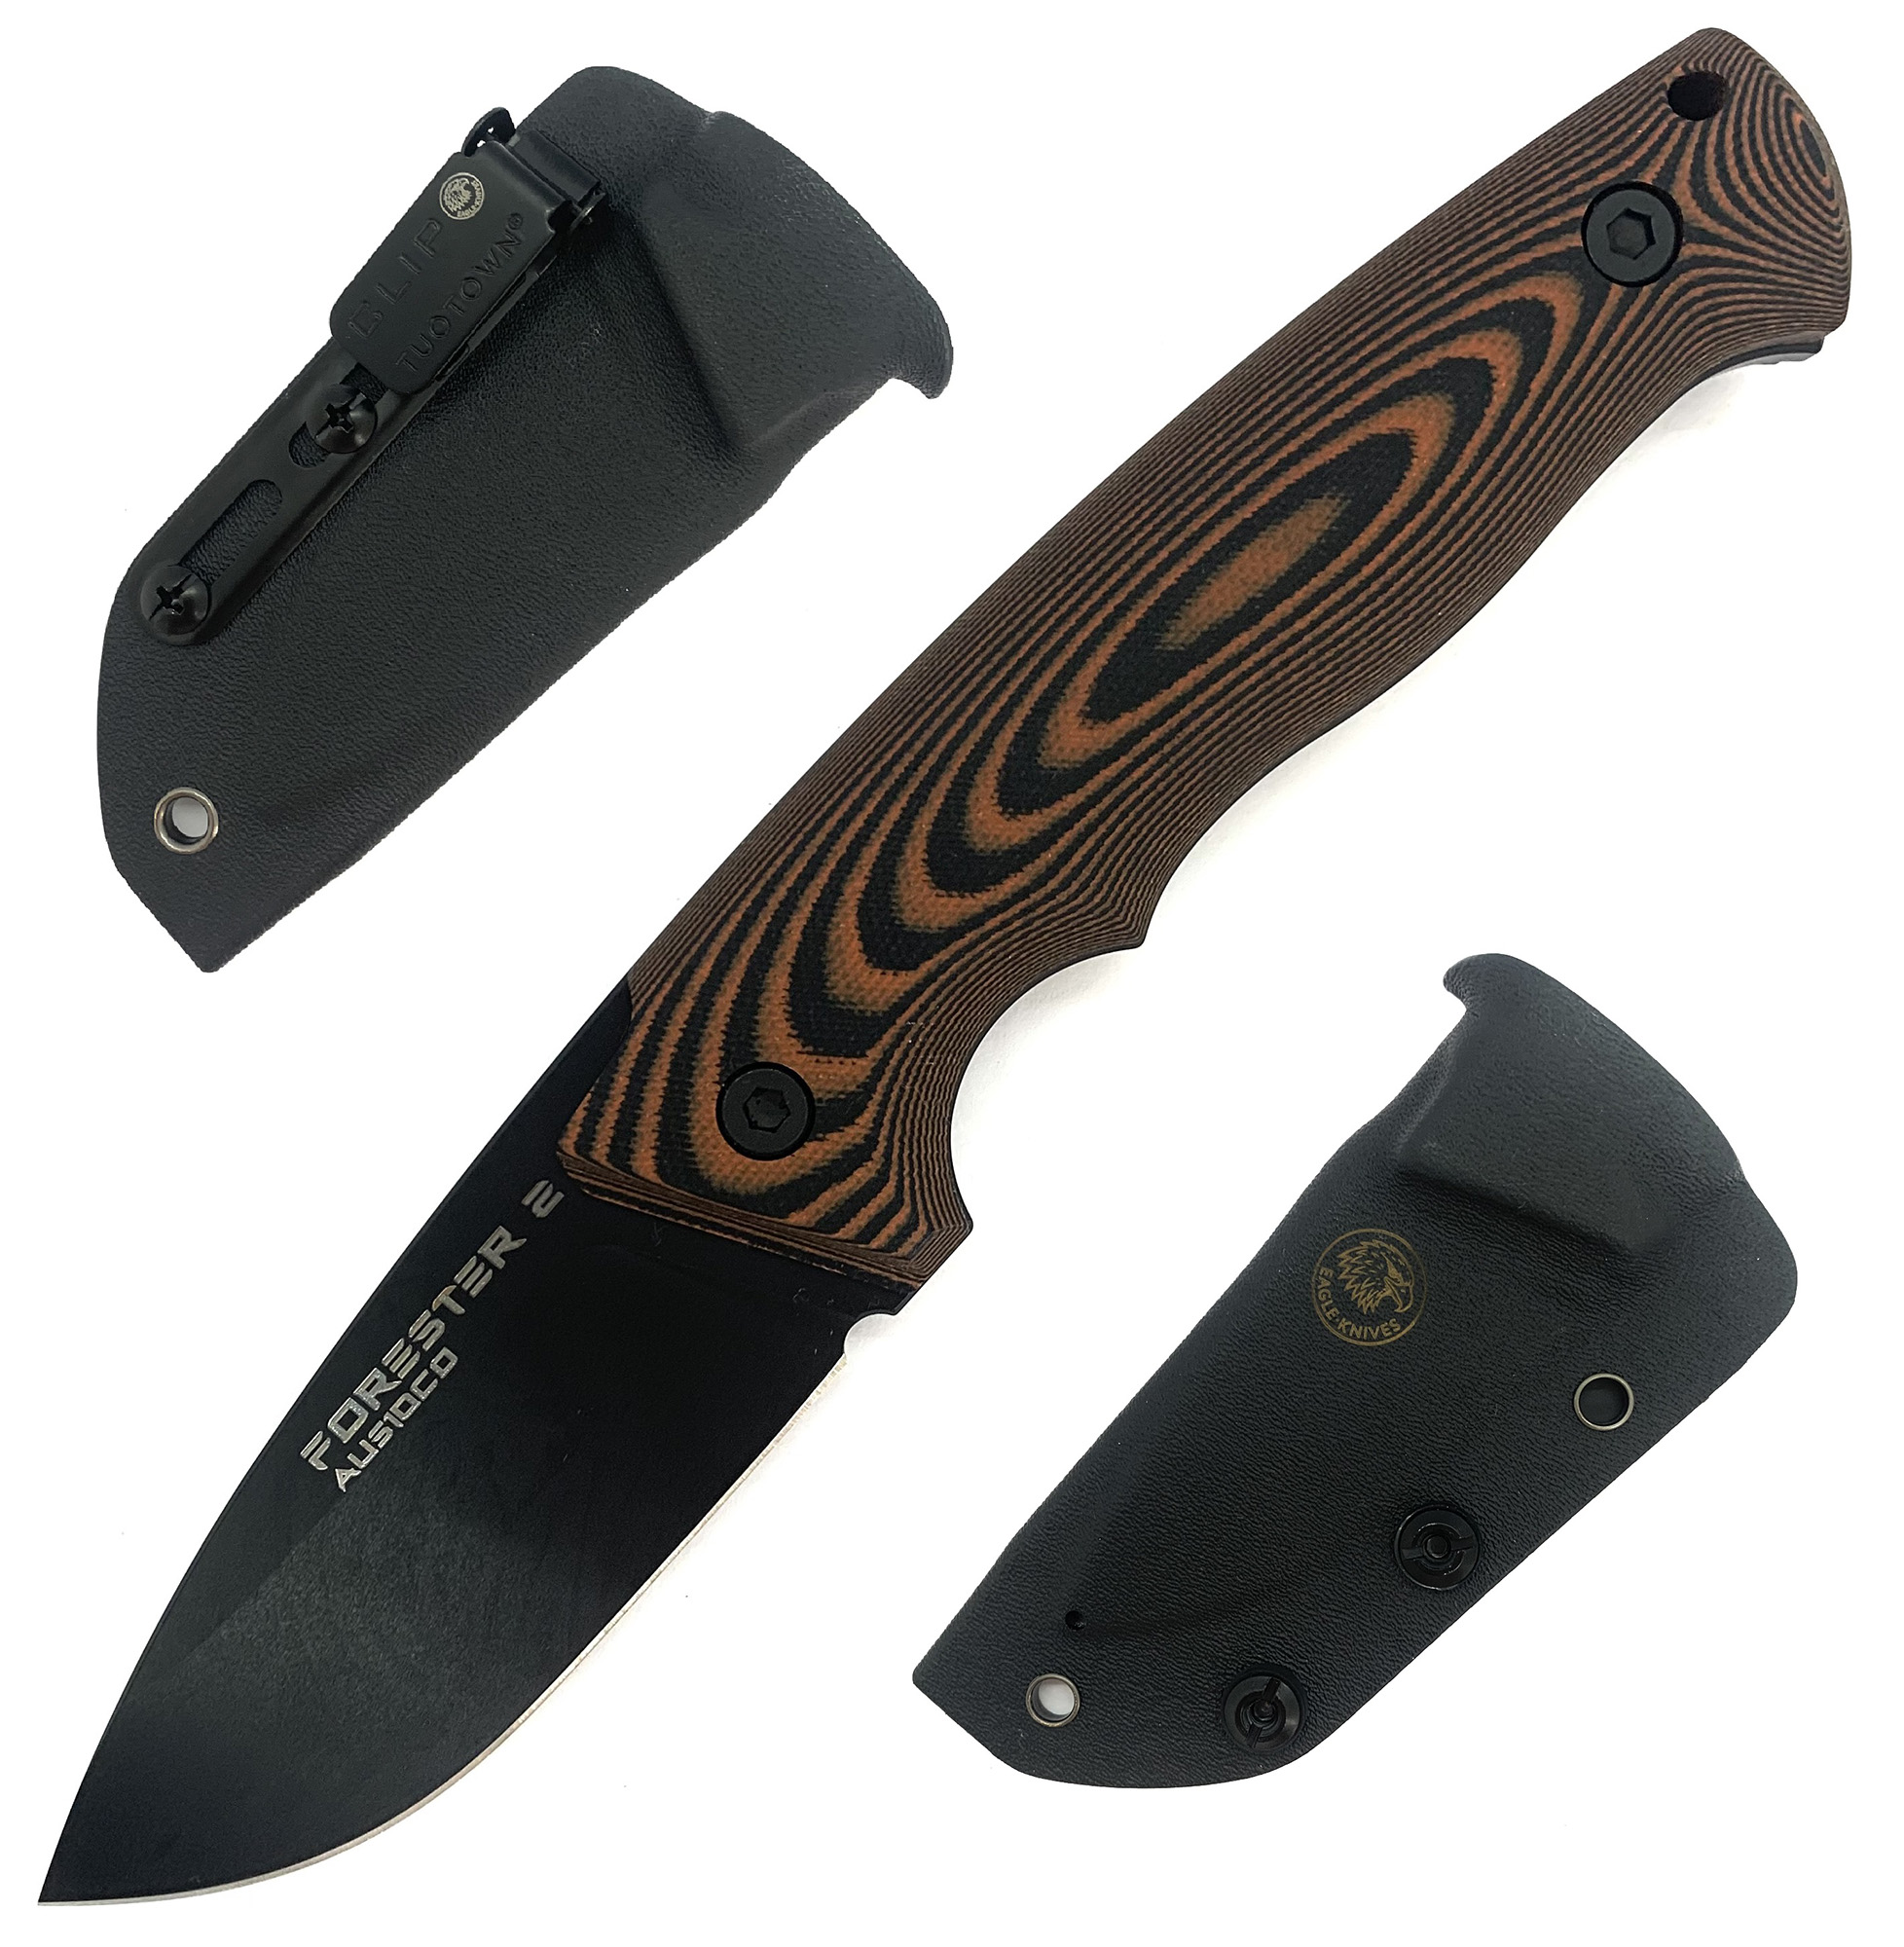  . Eagle Knives Forester 2 AUS10Co .  